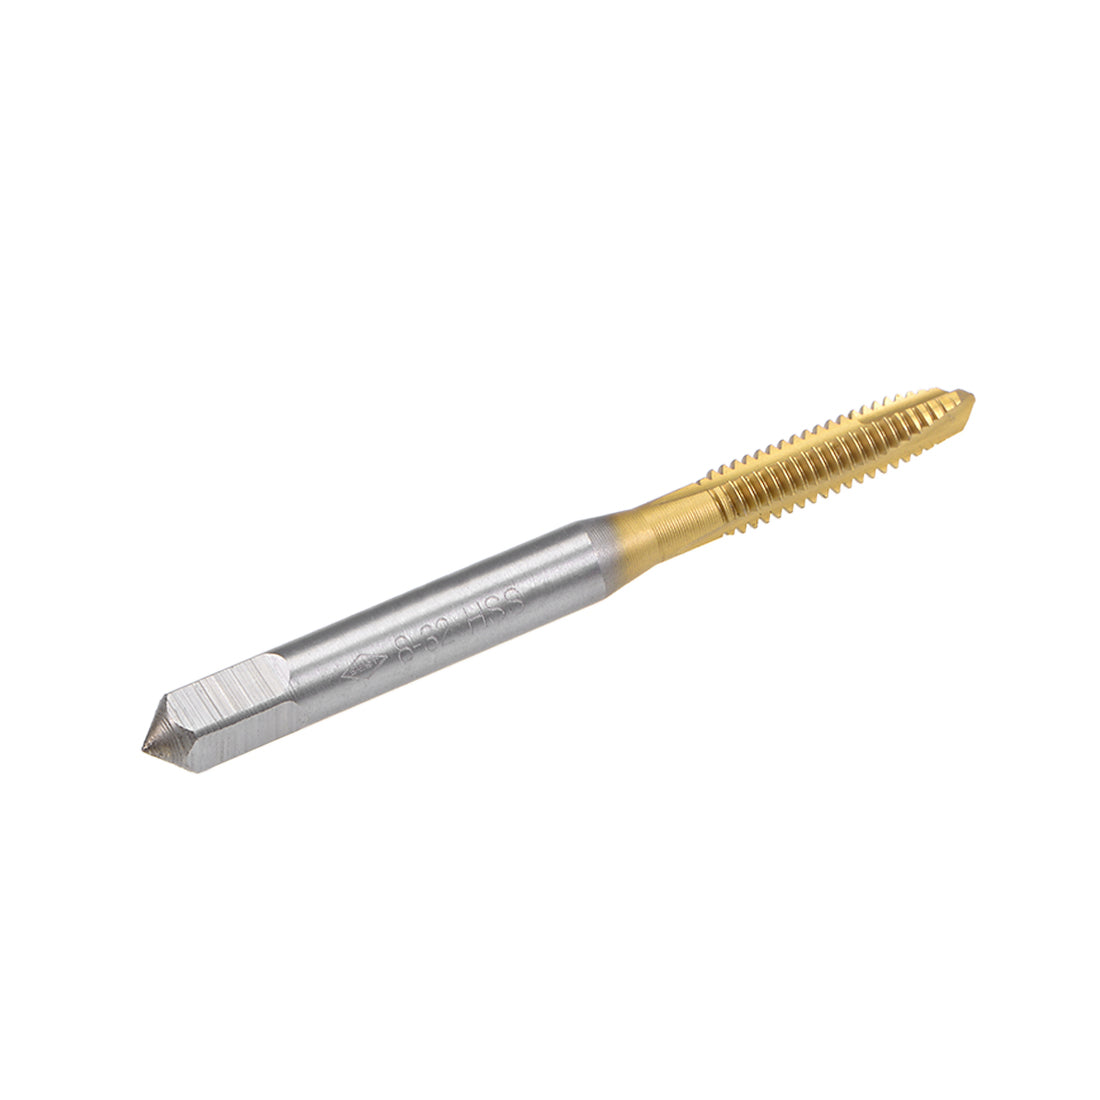 uxcell Uxcell Spiral Point Threading Tap 8-32 UNC Thread Pitch Titanium Coated HSS 2pcs